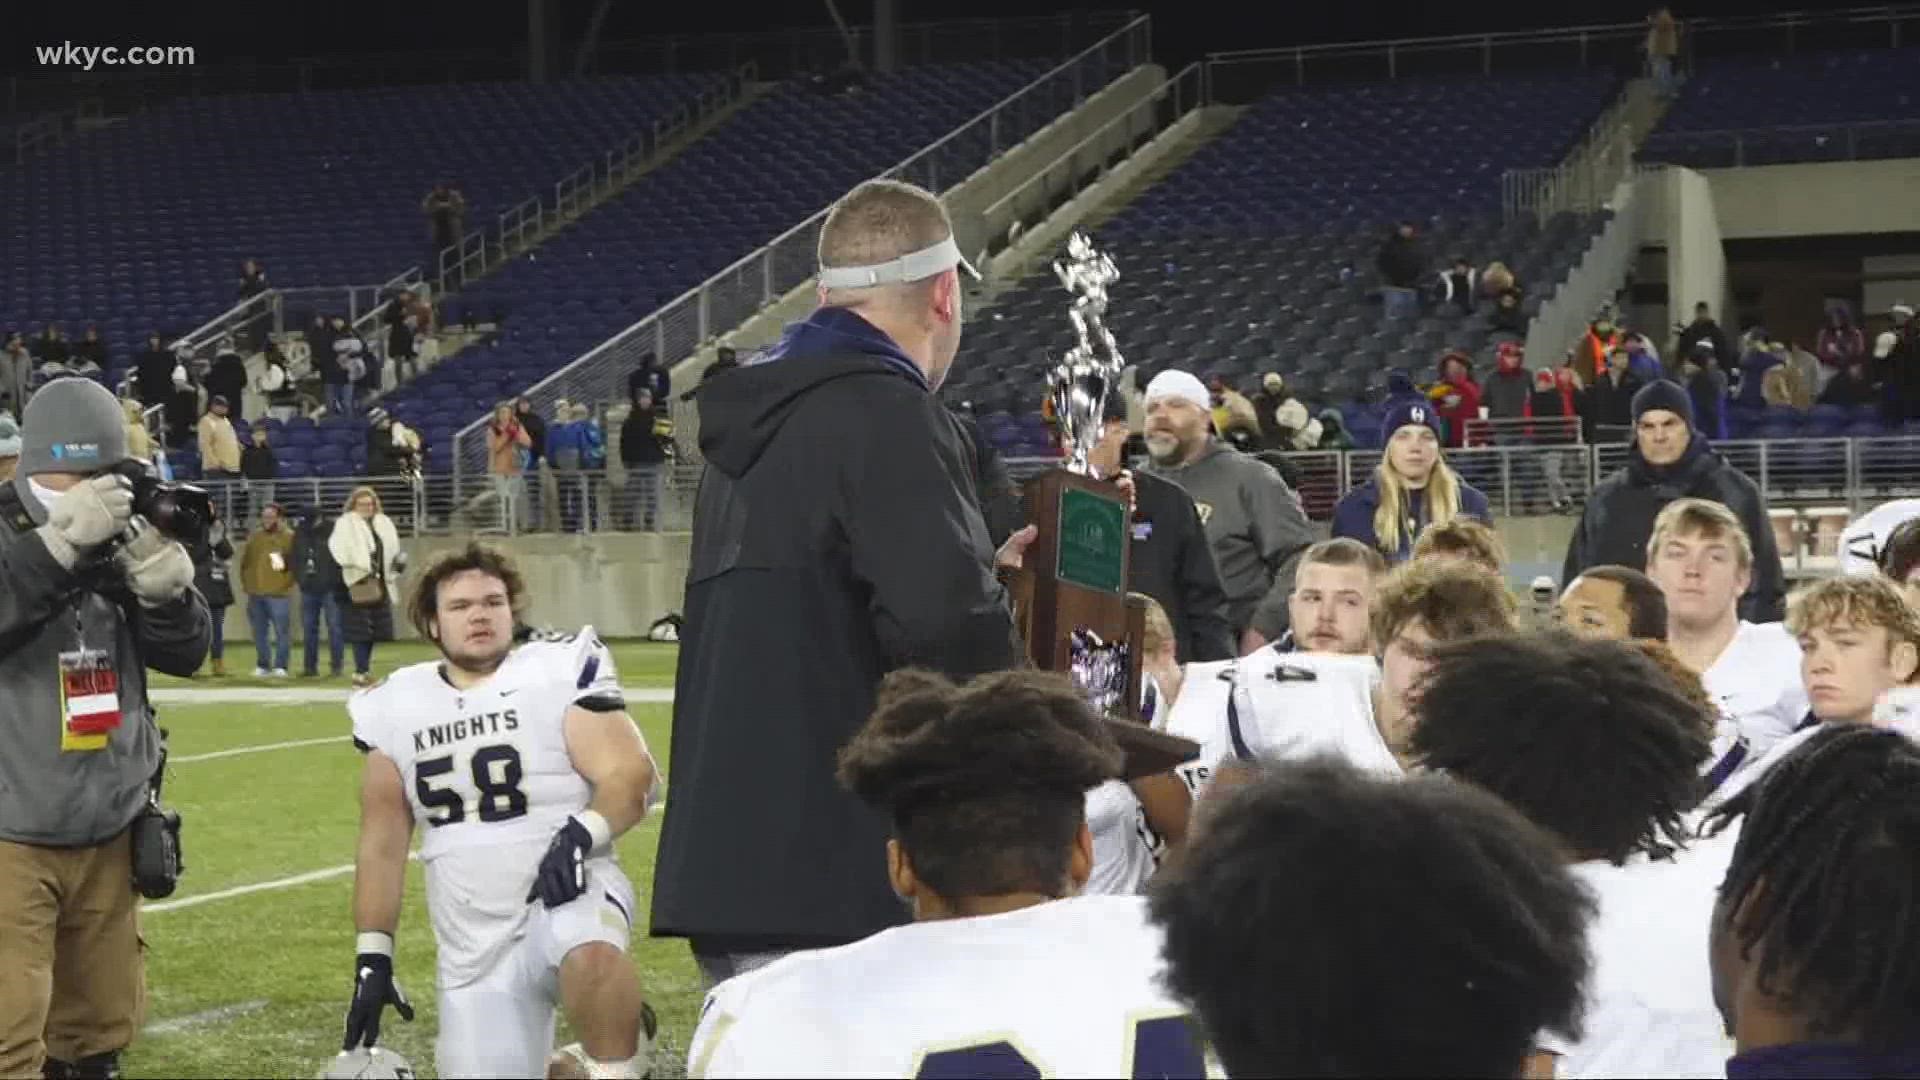 Hoban fell to Winton Woods, 21-10, at Tom Benson Hall of Fame Stadium. The Knights were looking to win their third state title in four years in Division II.